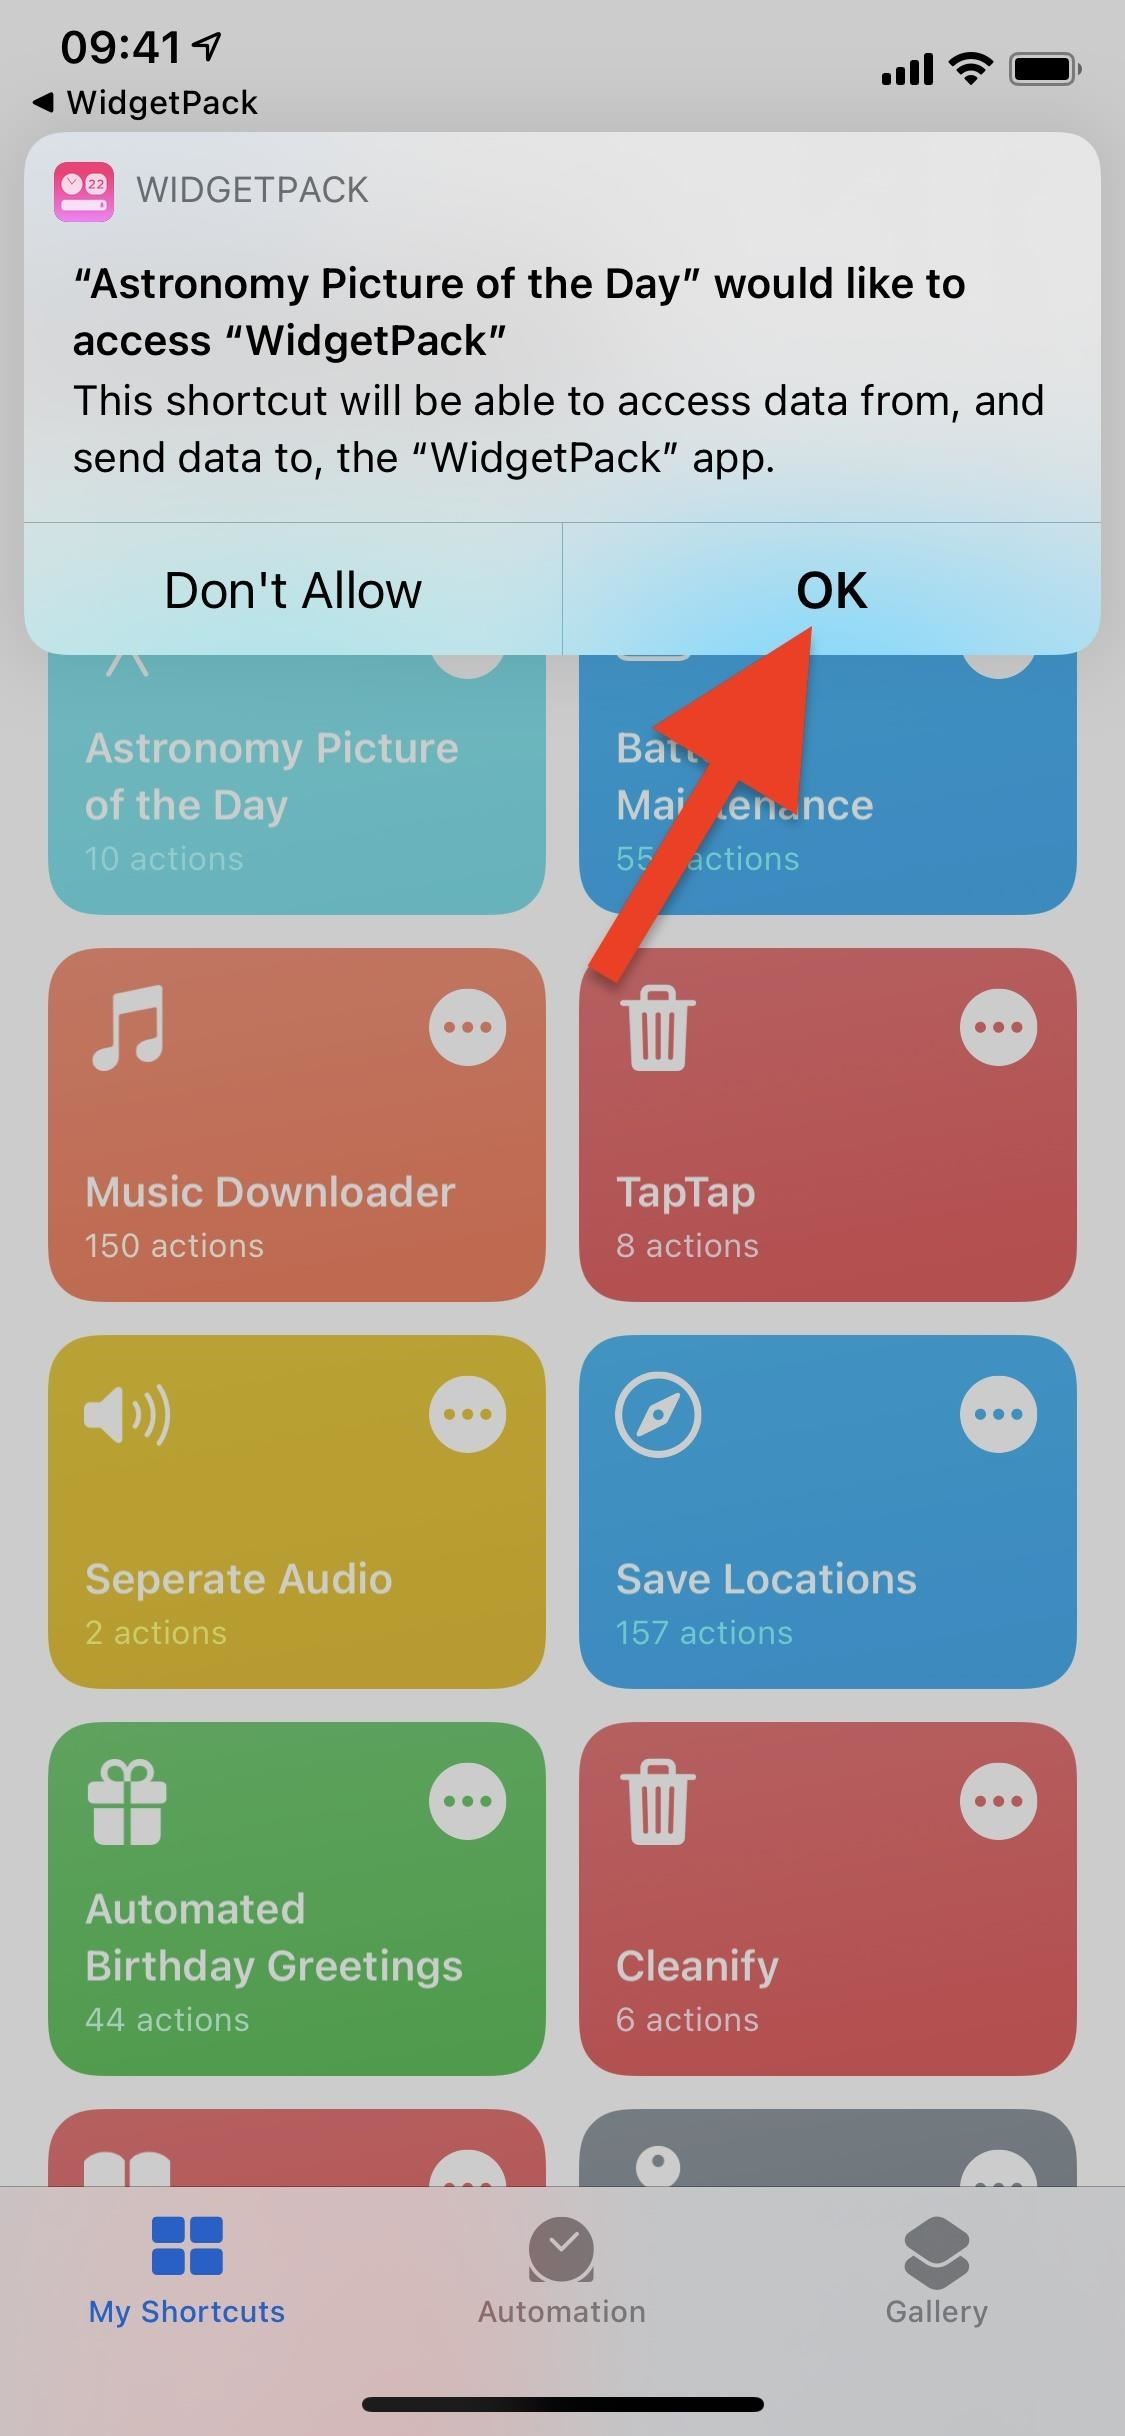 Create Your Own Home Screen Widgets in iOS 14 for an Even More Customized iPhone